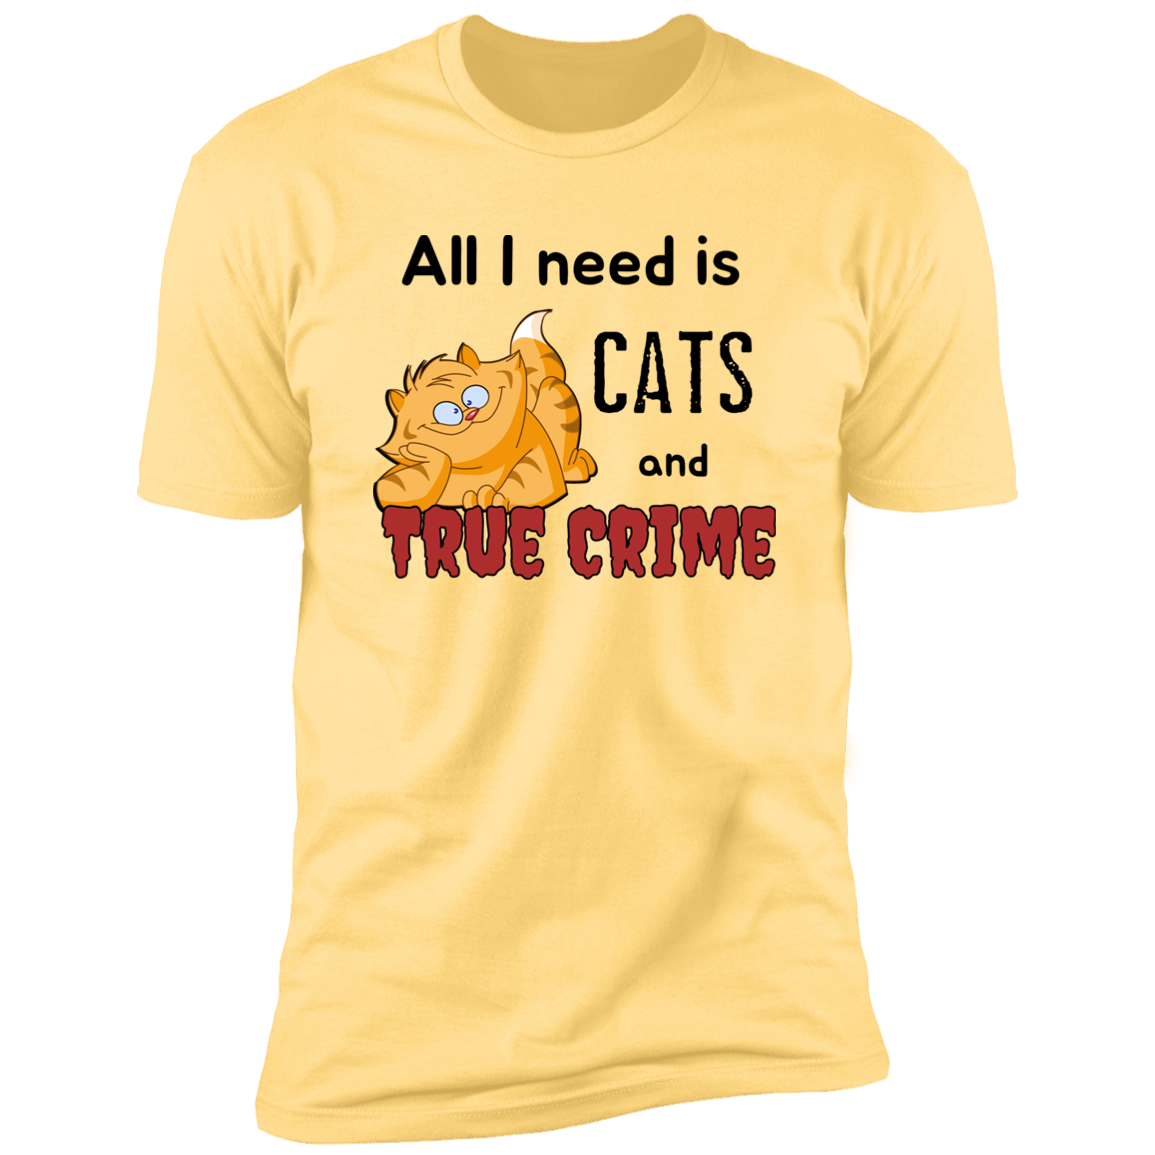 All I Need is Cats and True Crime, Cat shirt for humas, in banana cream